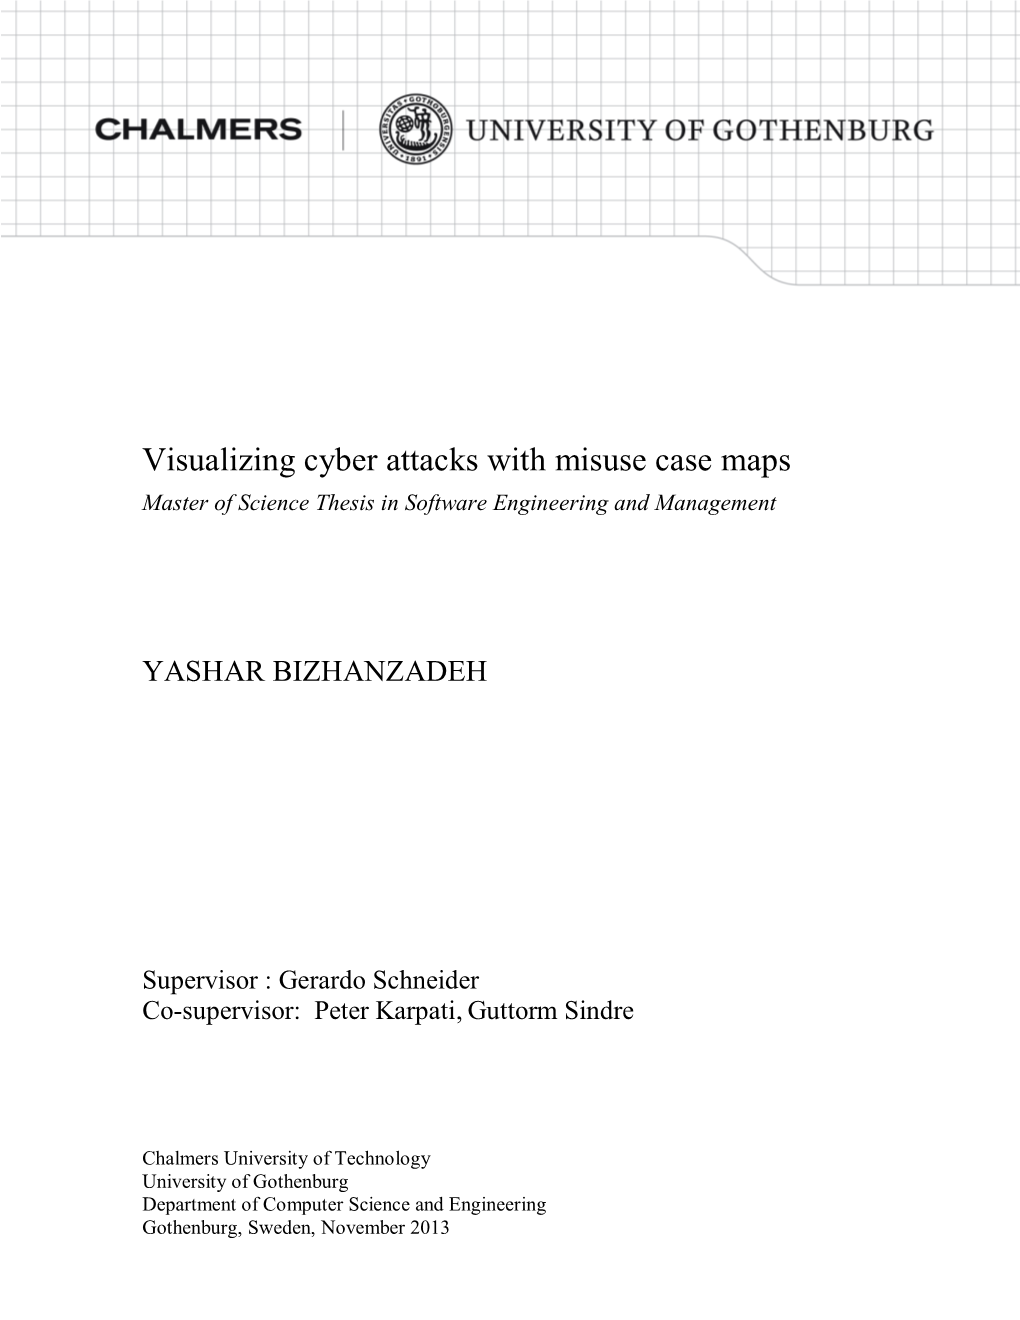 Visualizing Cyber Attacks with Misuse Case Maps Master of Science Thesis in Software Engineering and Management